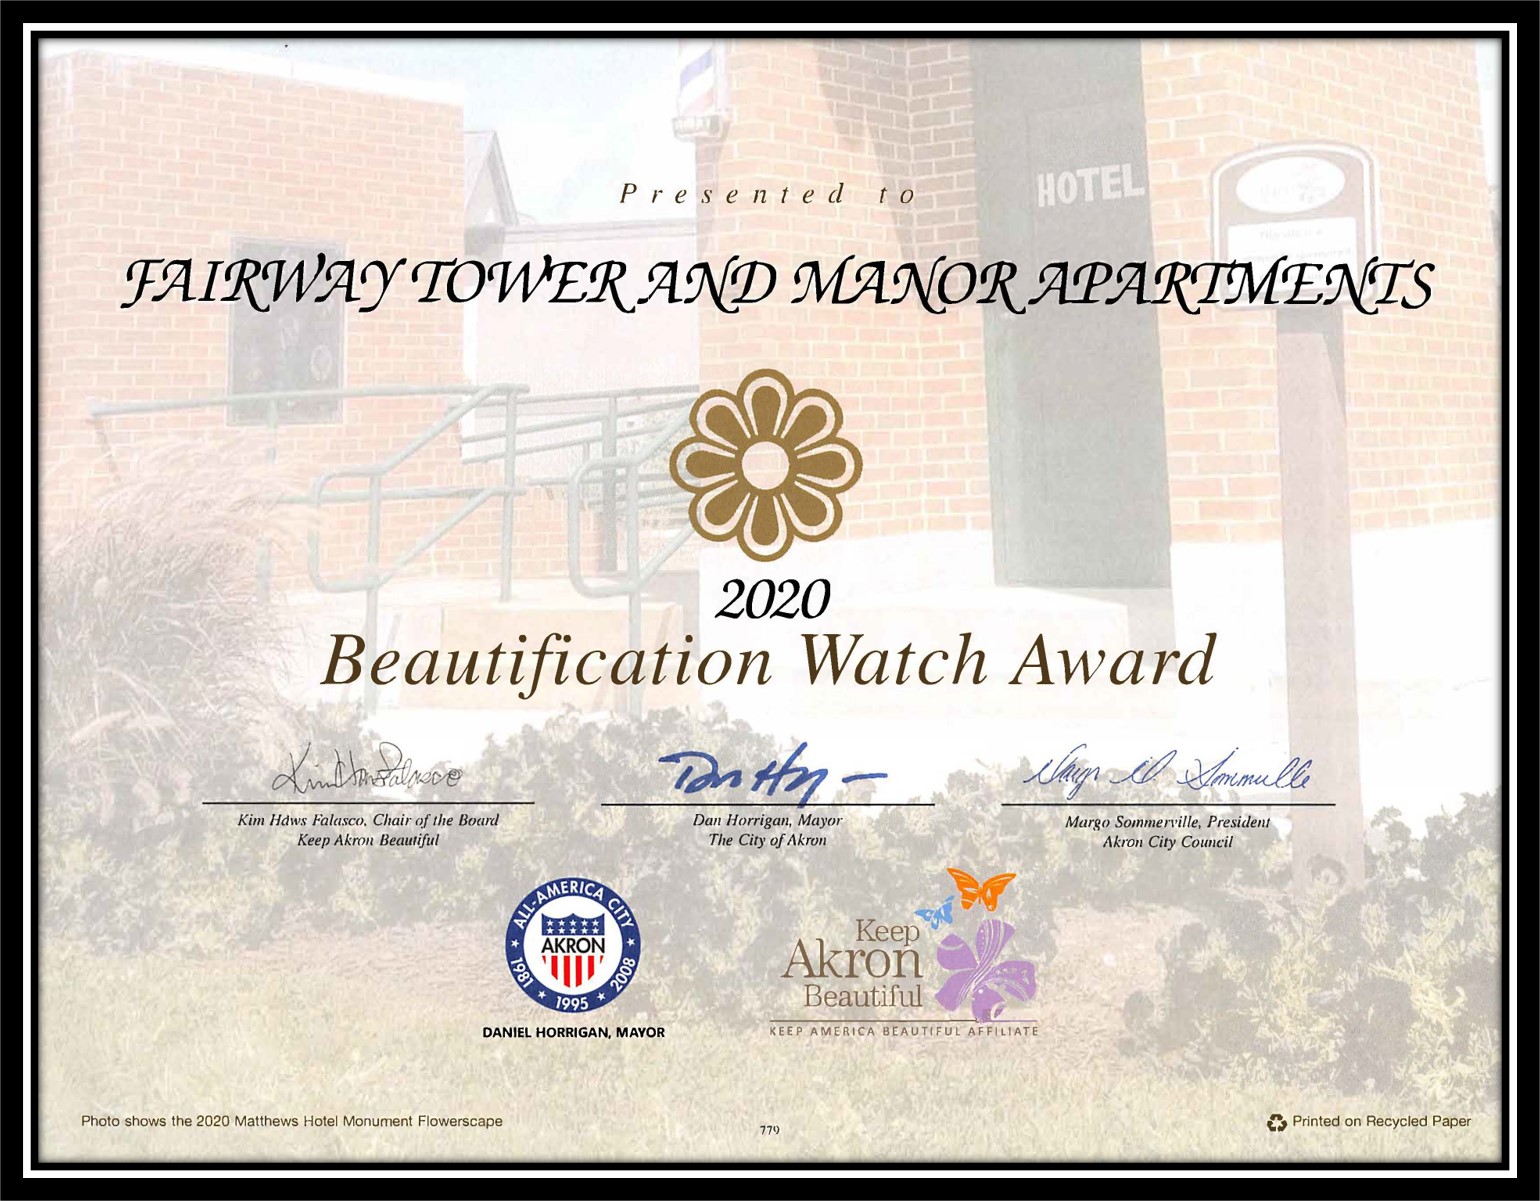 Beautification Watch Award Fairway Tower and Manor Apartments, 750 Mull Avenue, Akron, OH 44313